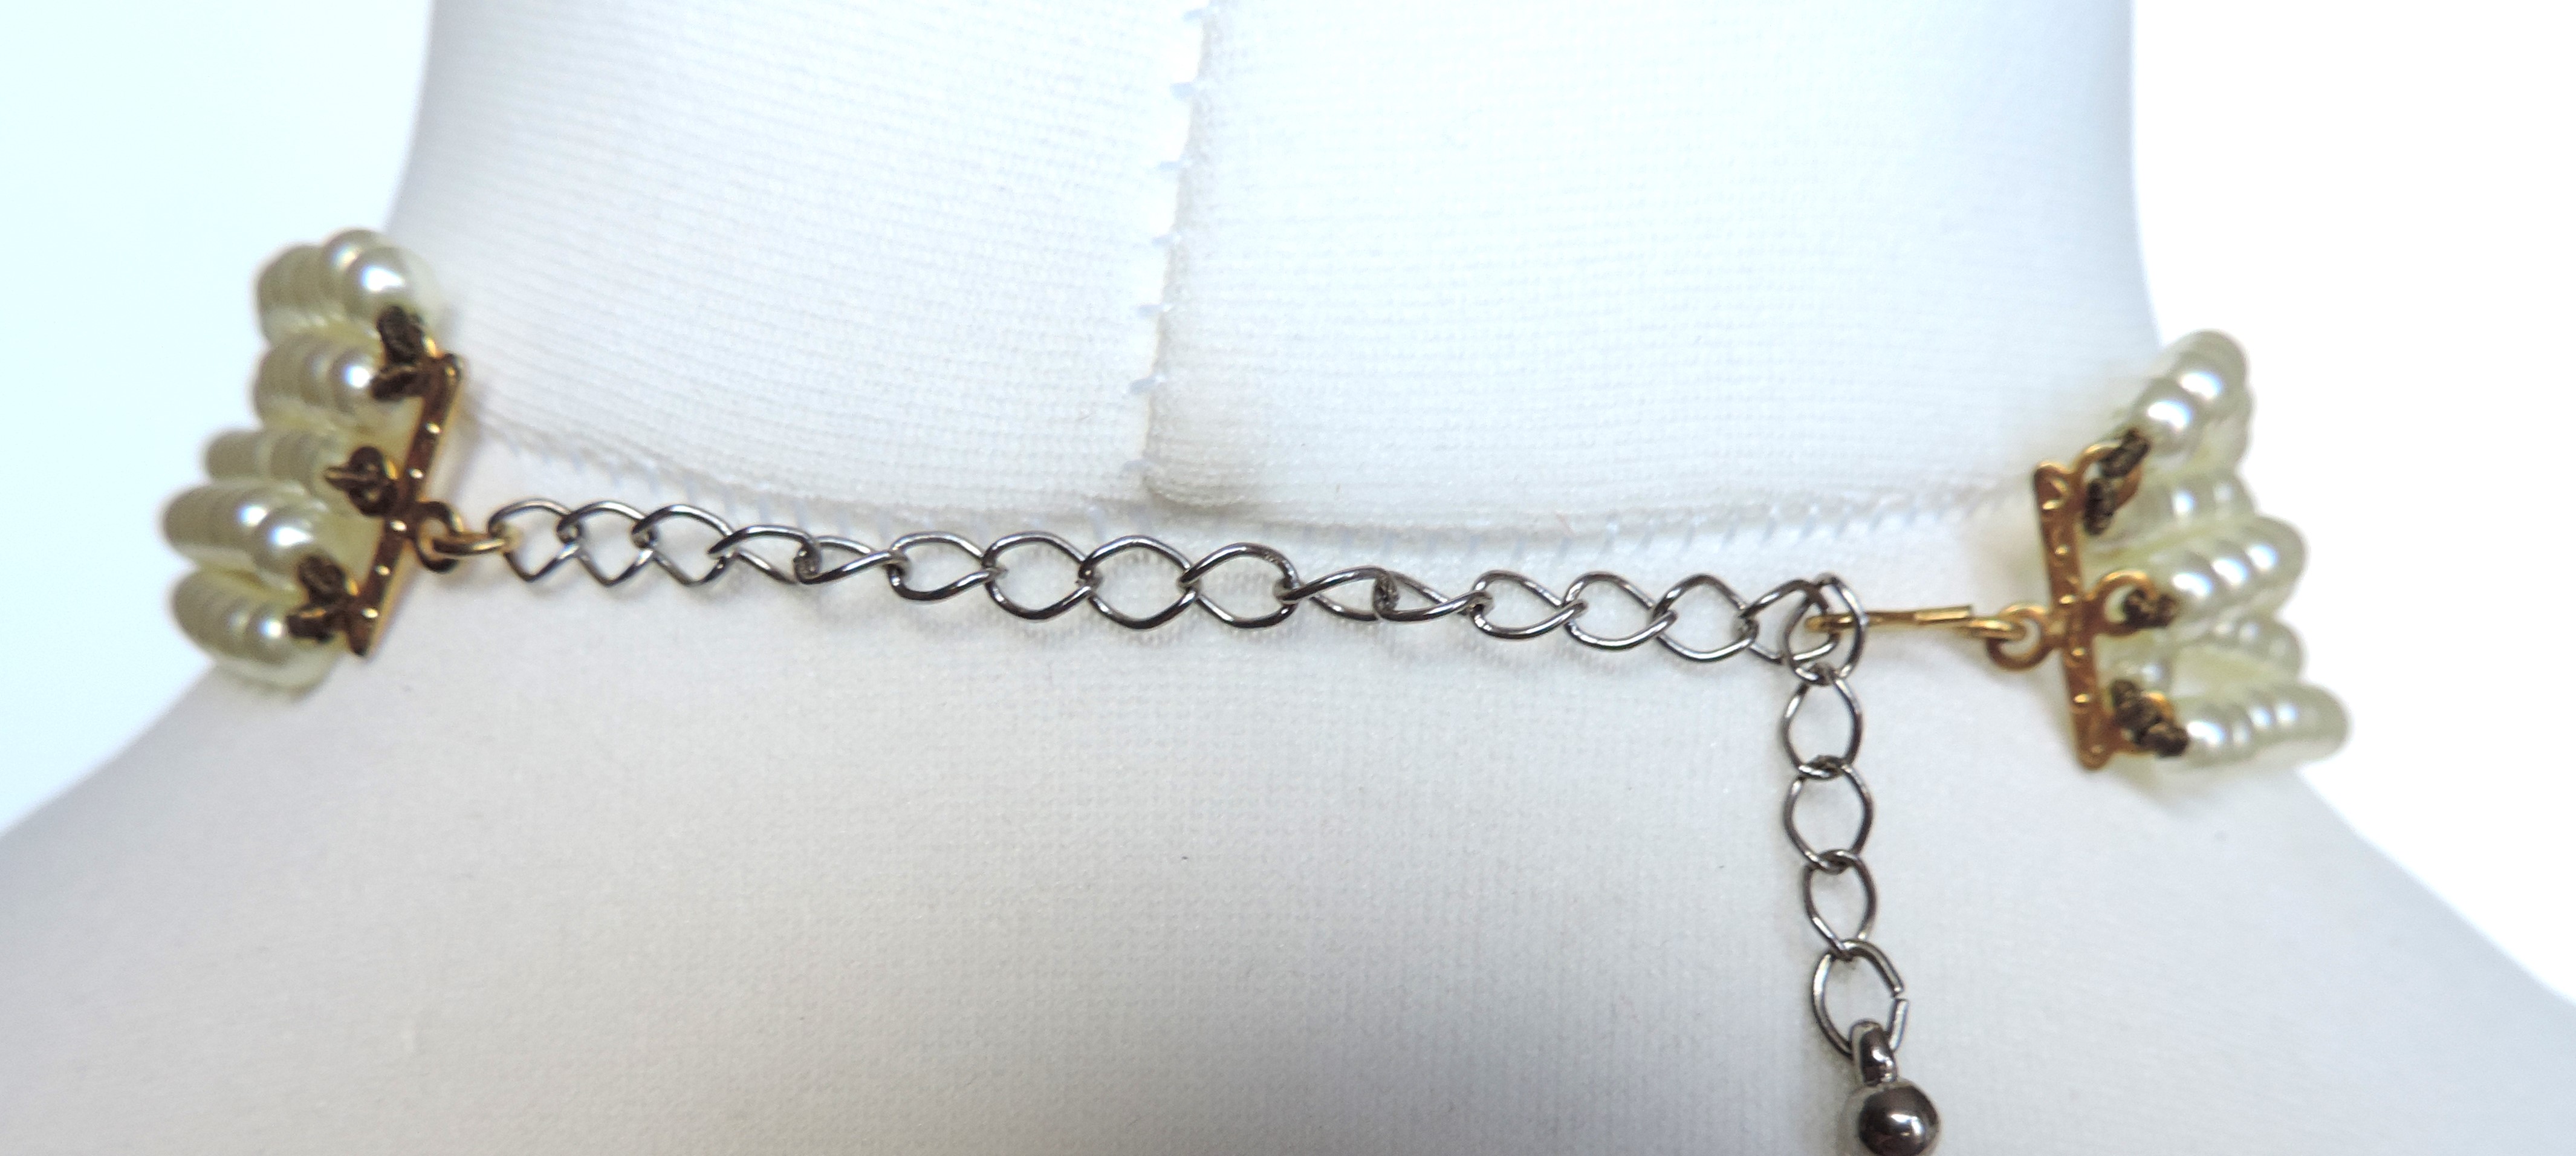 Five Strand Pearl Choker Necklace New with Gift Box - Image 3 of 4